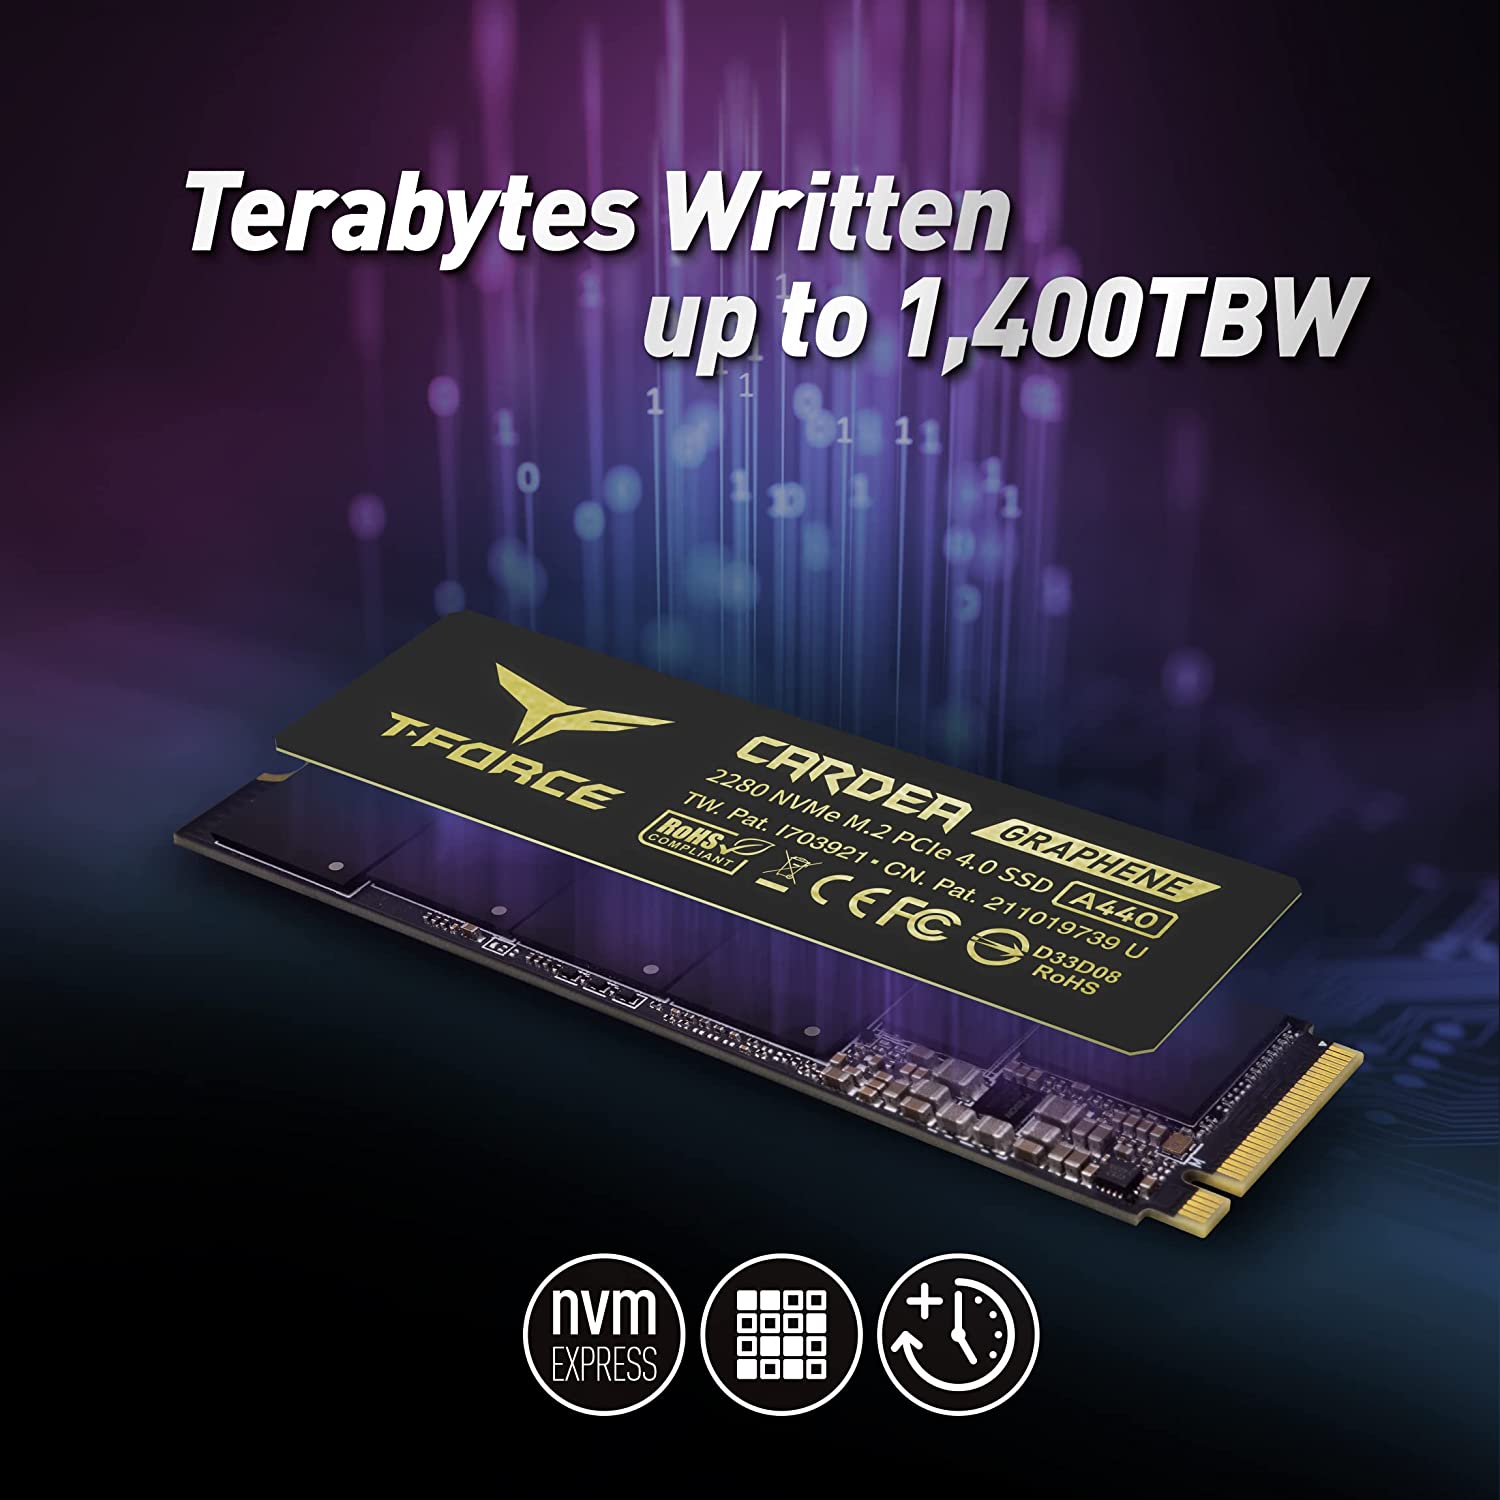 2TB TEAMGROUP T-Force CARDEA A440 Graphene & Aluminum Heatsink with DRAM 3D NAND TLC NVMe PCIe Gen4 x4 M.2 2280 Works with PS5 Internal SSD 7,000/6,900 MB/s - $101.99